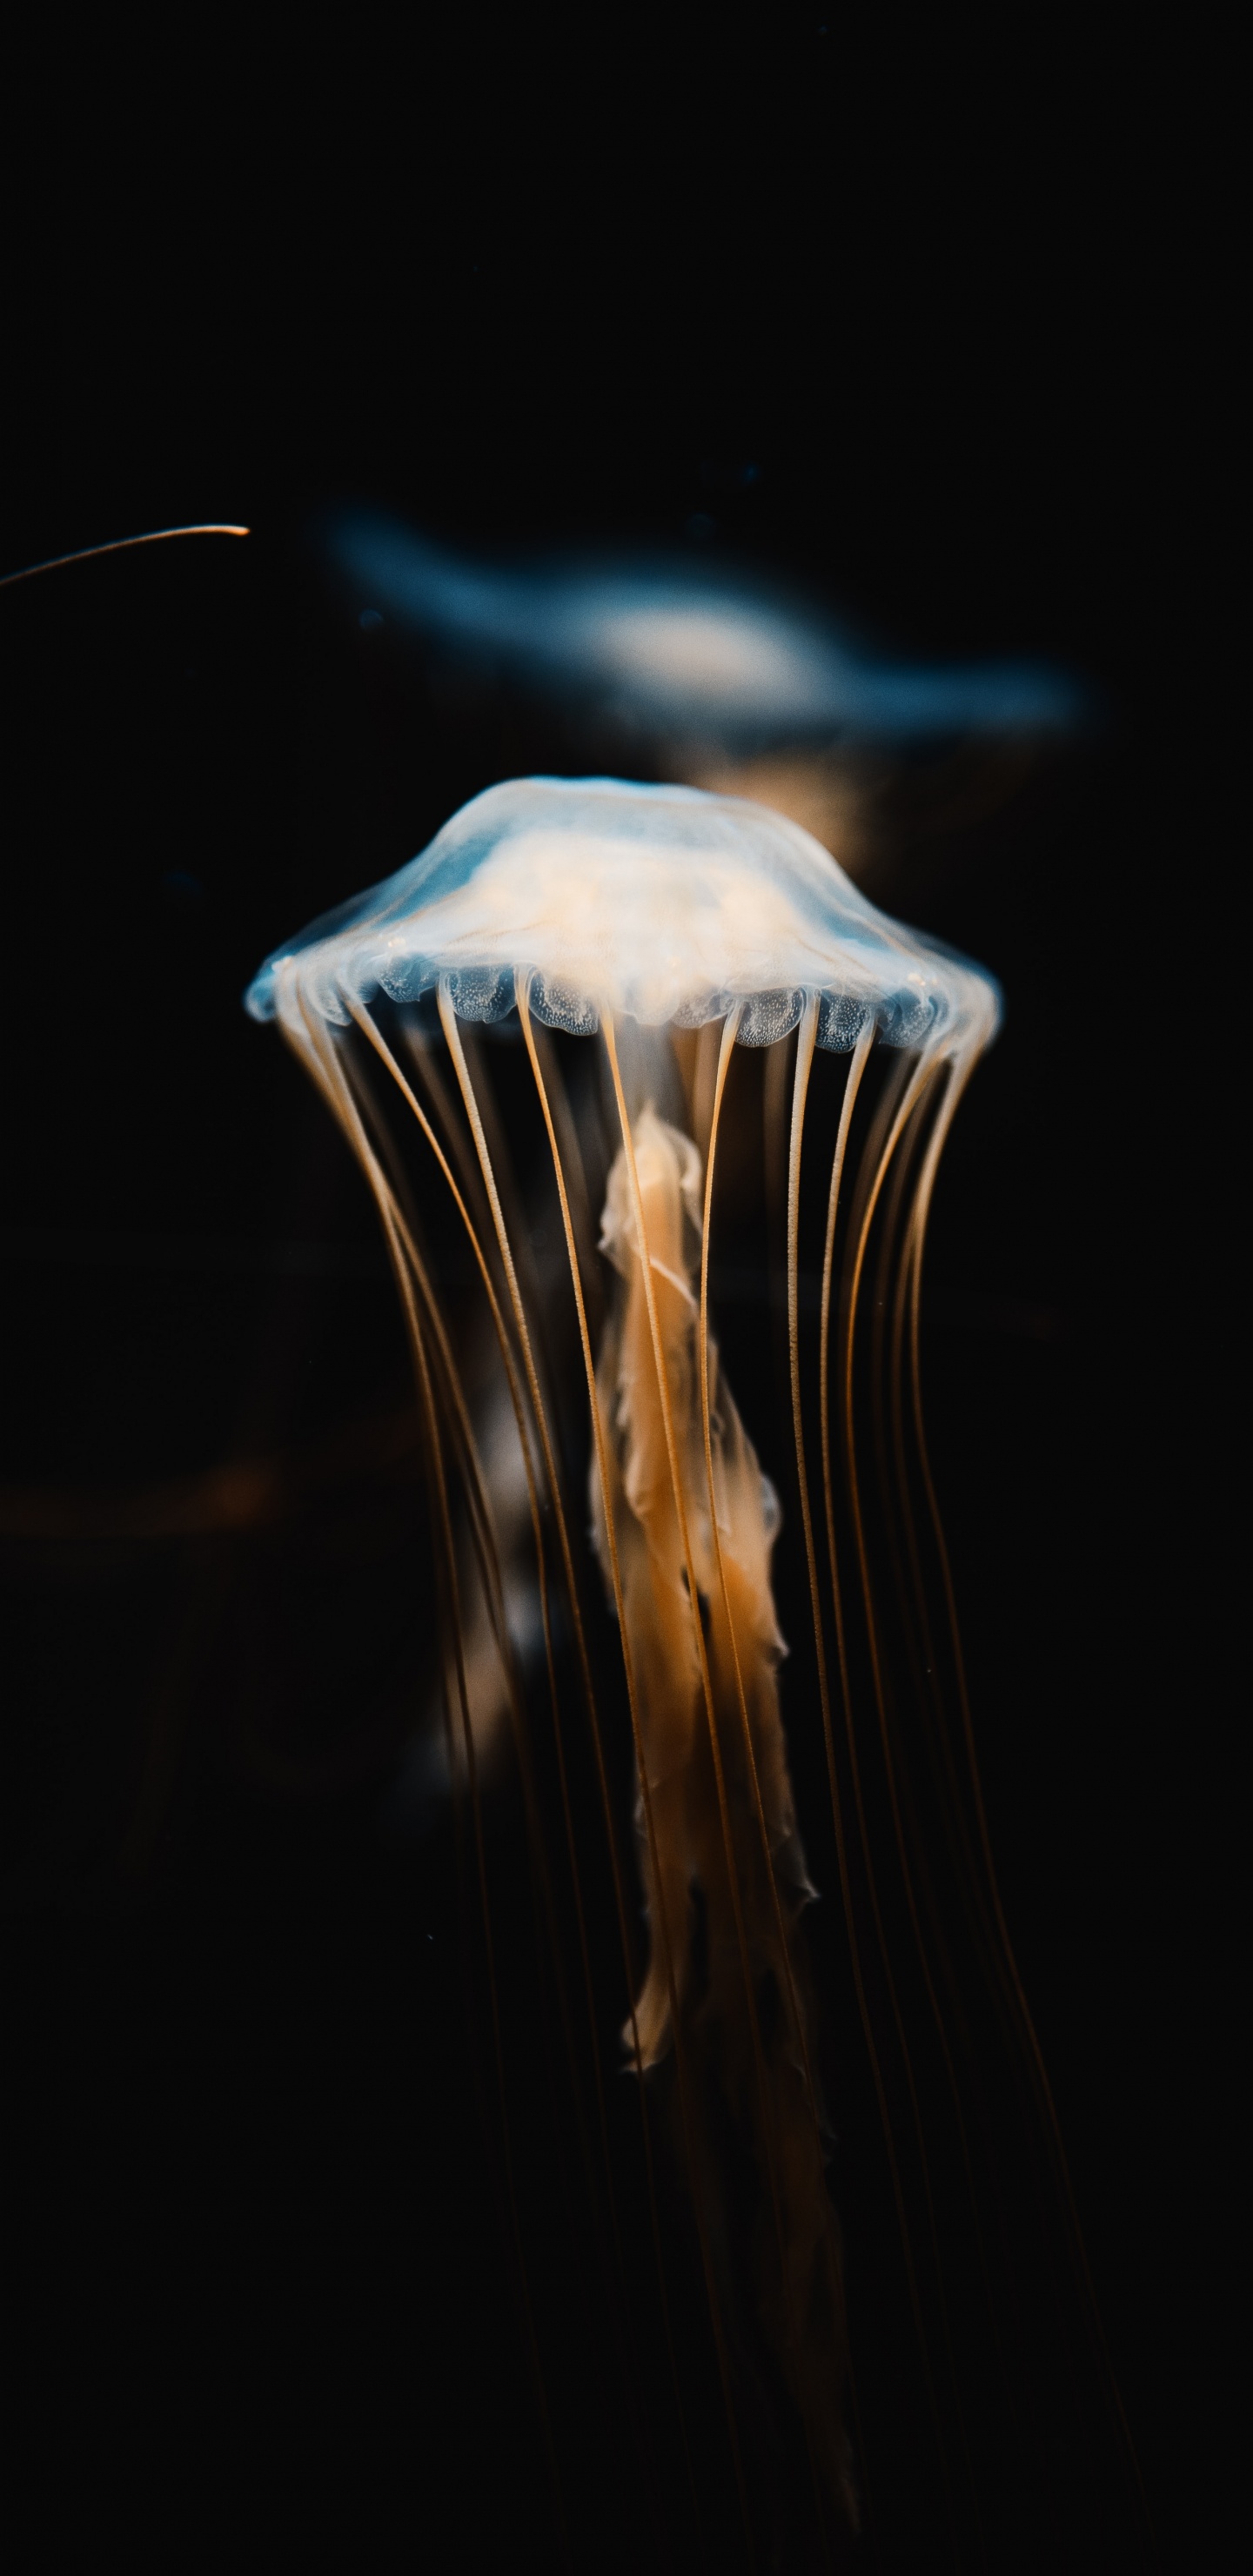 Blue and White Jellyfish in Dark Room. Wallpaper in 1440x2960 Resolution